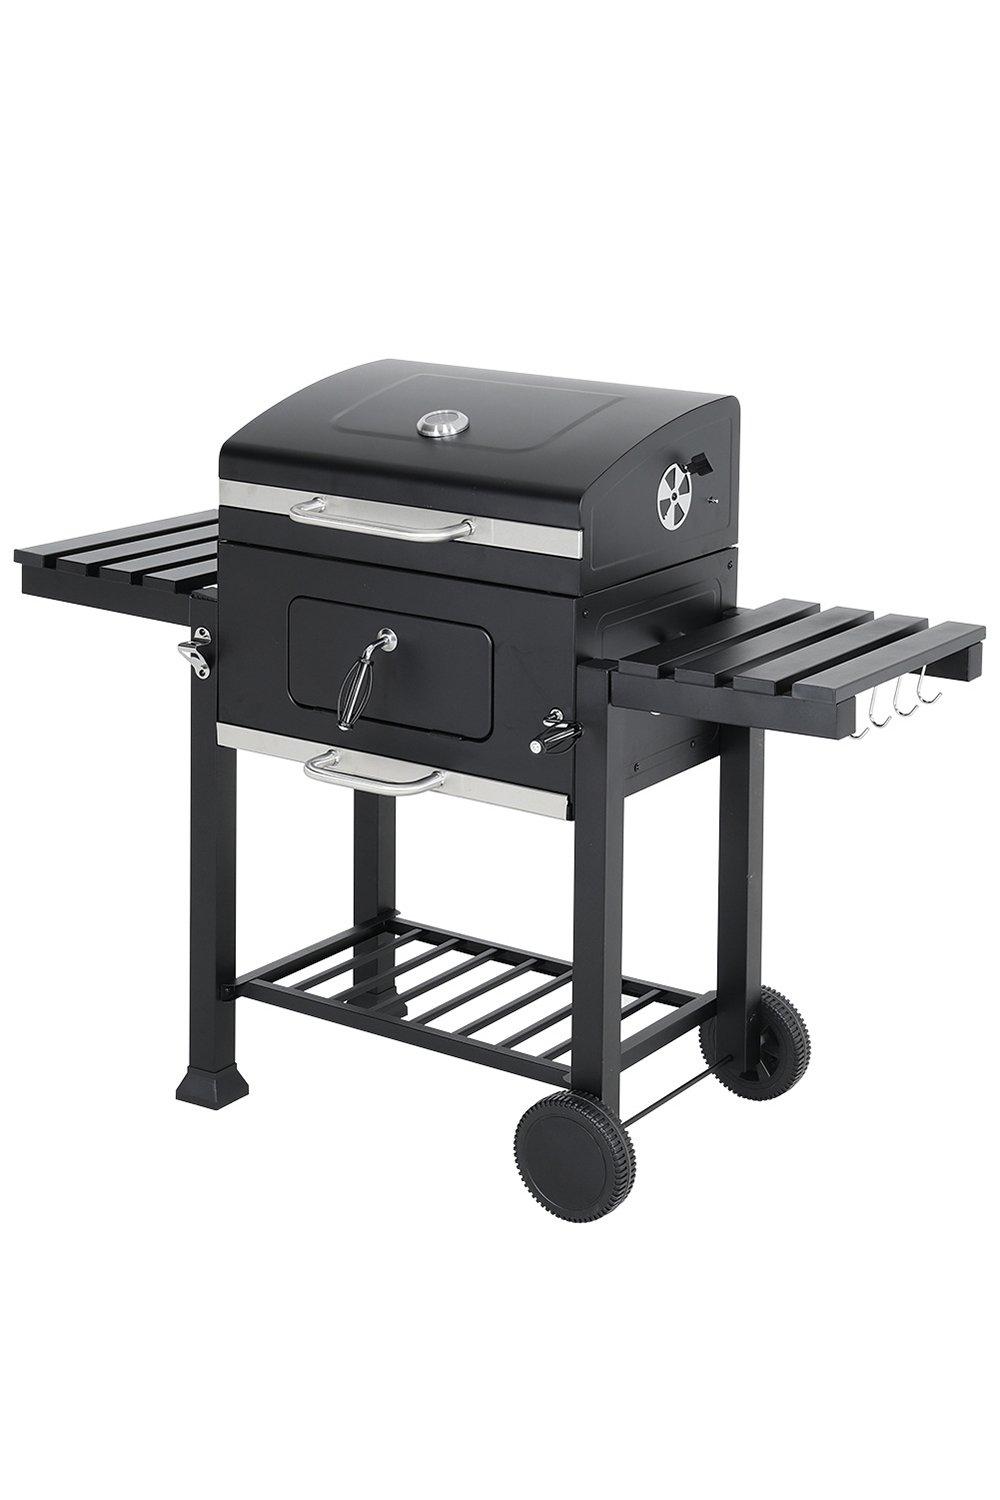 Save 51%: Carbon Steel Grill Mobile Stove Charcoal BBQ
